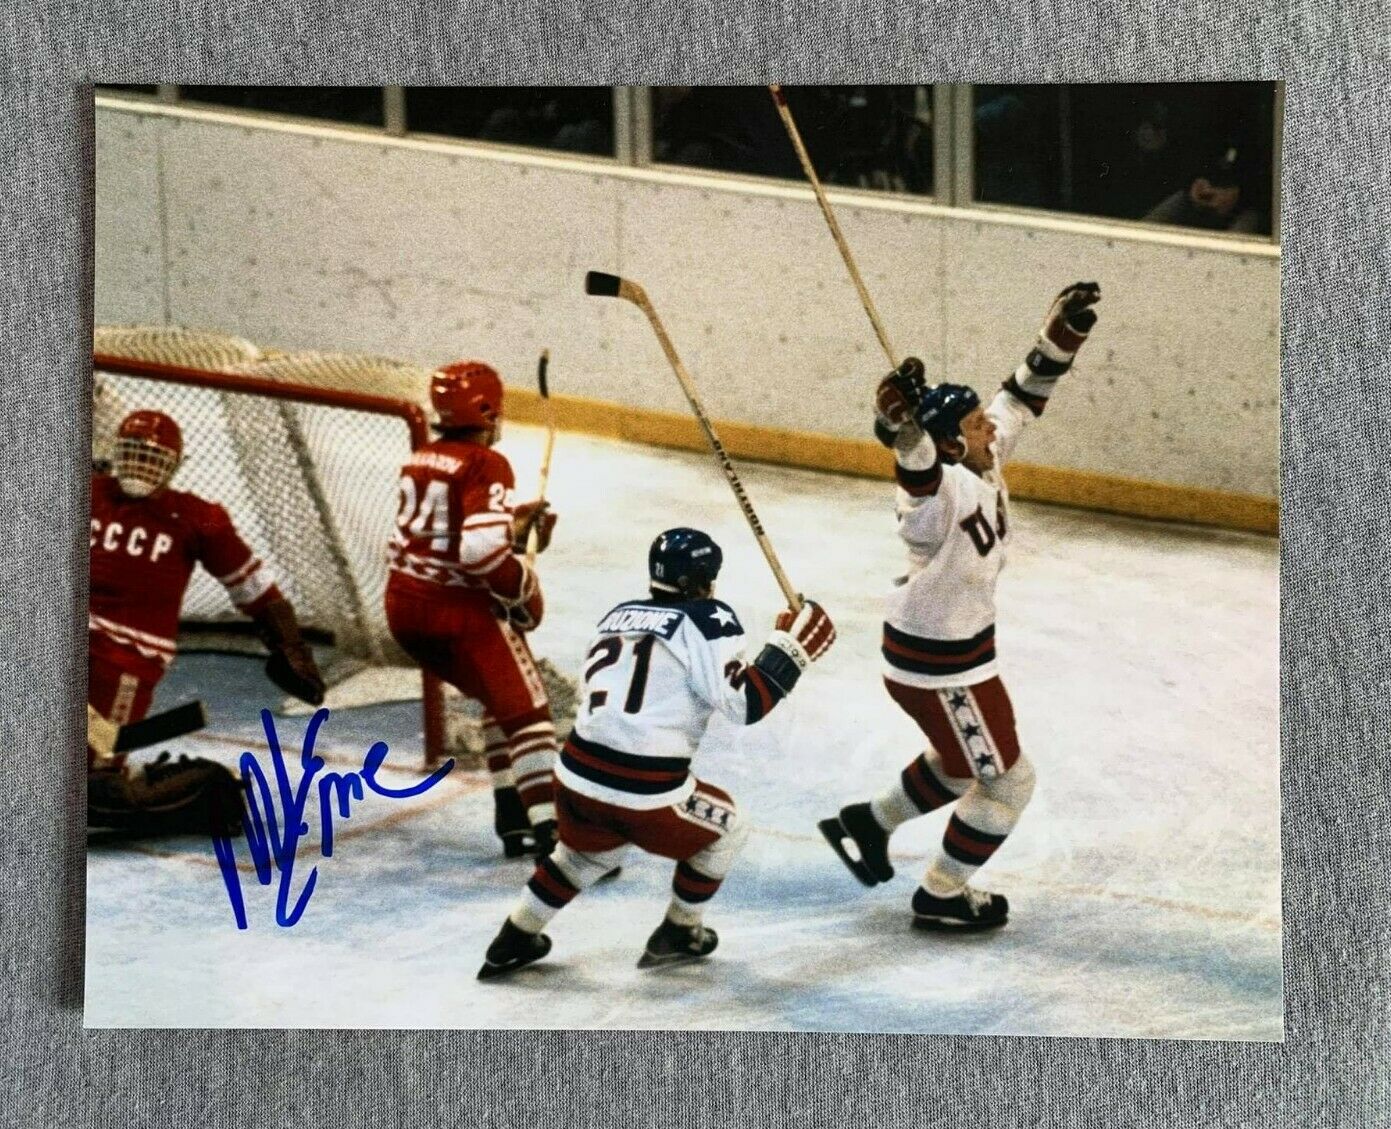 1980 Usa Hockey Olympic Gold- Mike Eruzione Autograph 8x10 Action Photo #5 Auto